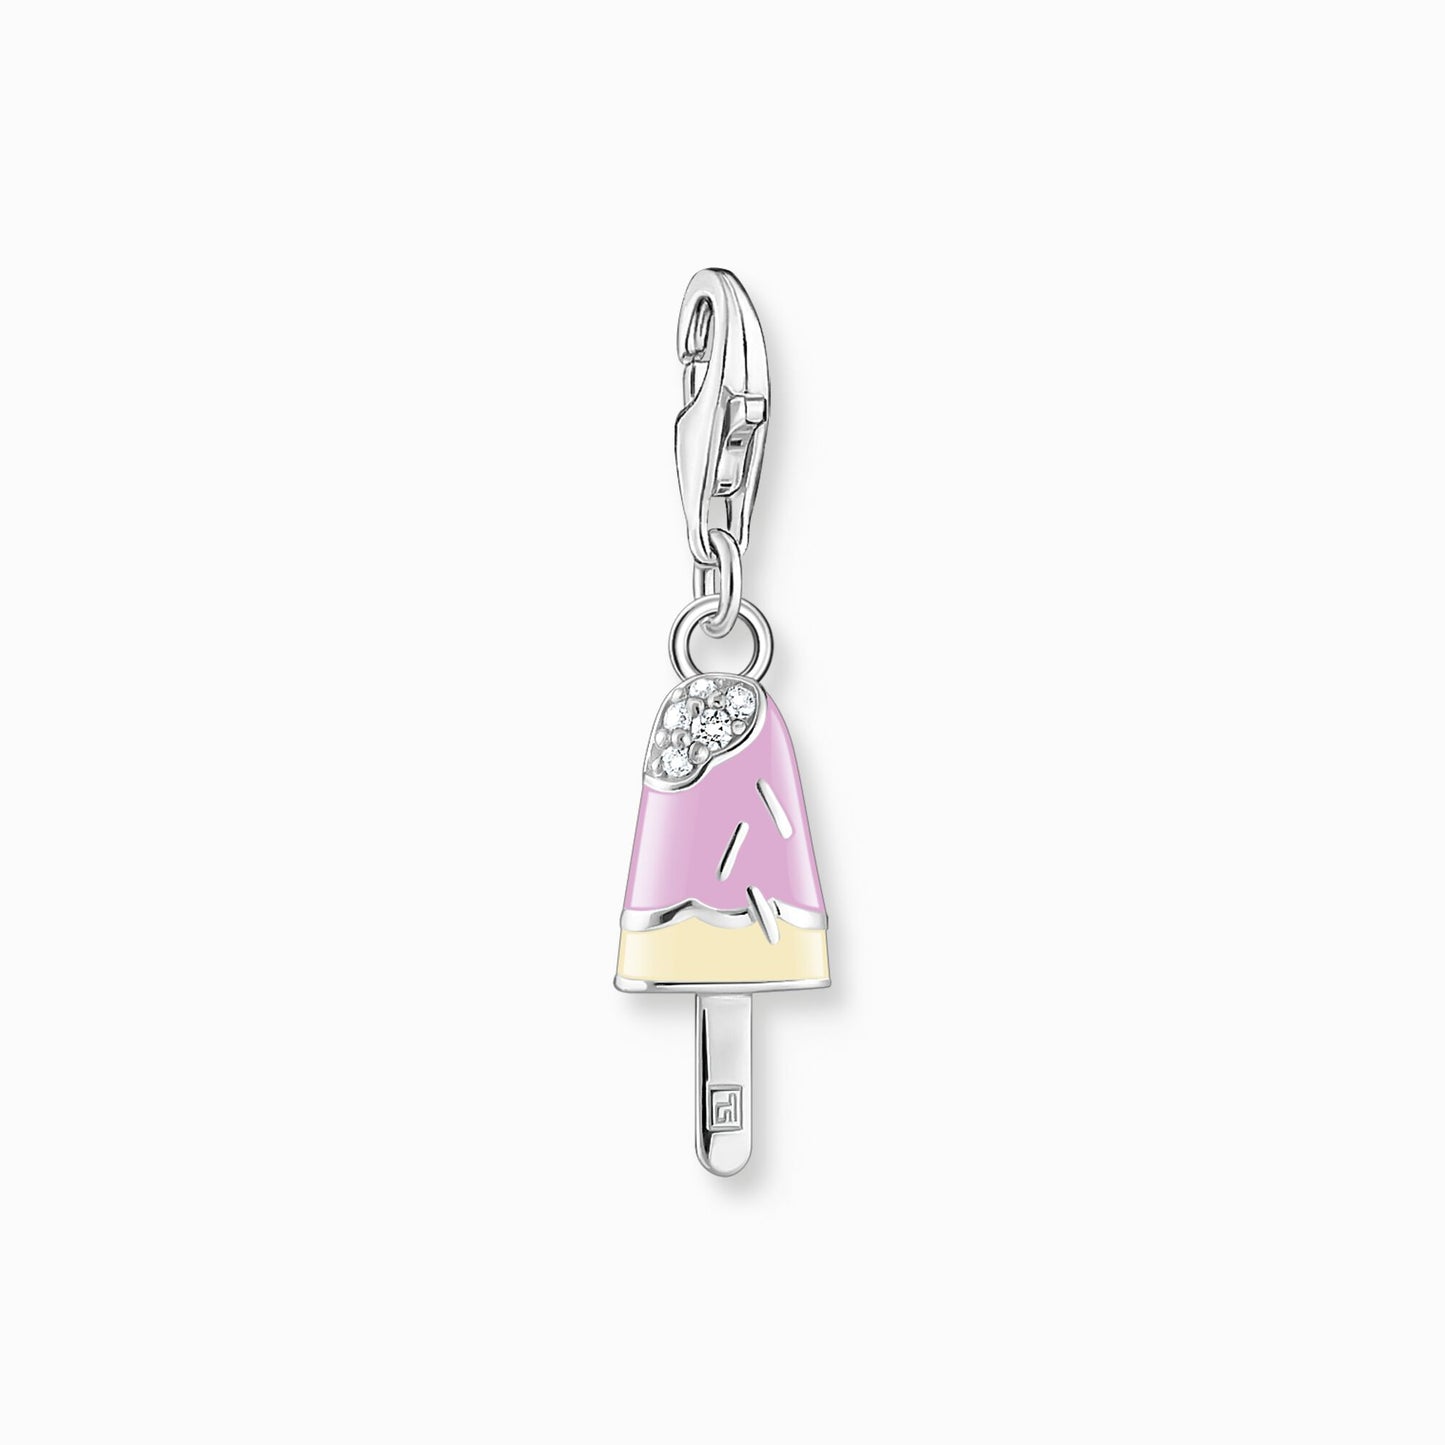 Thomas Sabo Charm Pendant Colorful Popsicle With White Stones Silver 1999-041-7